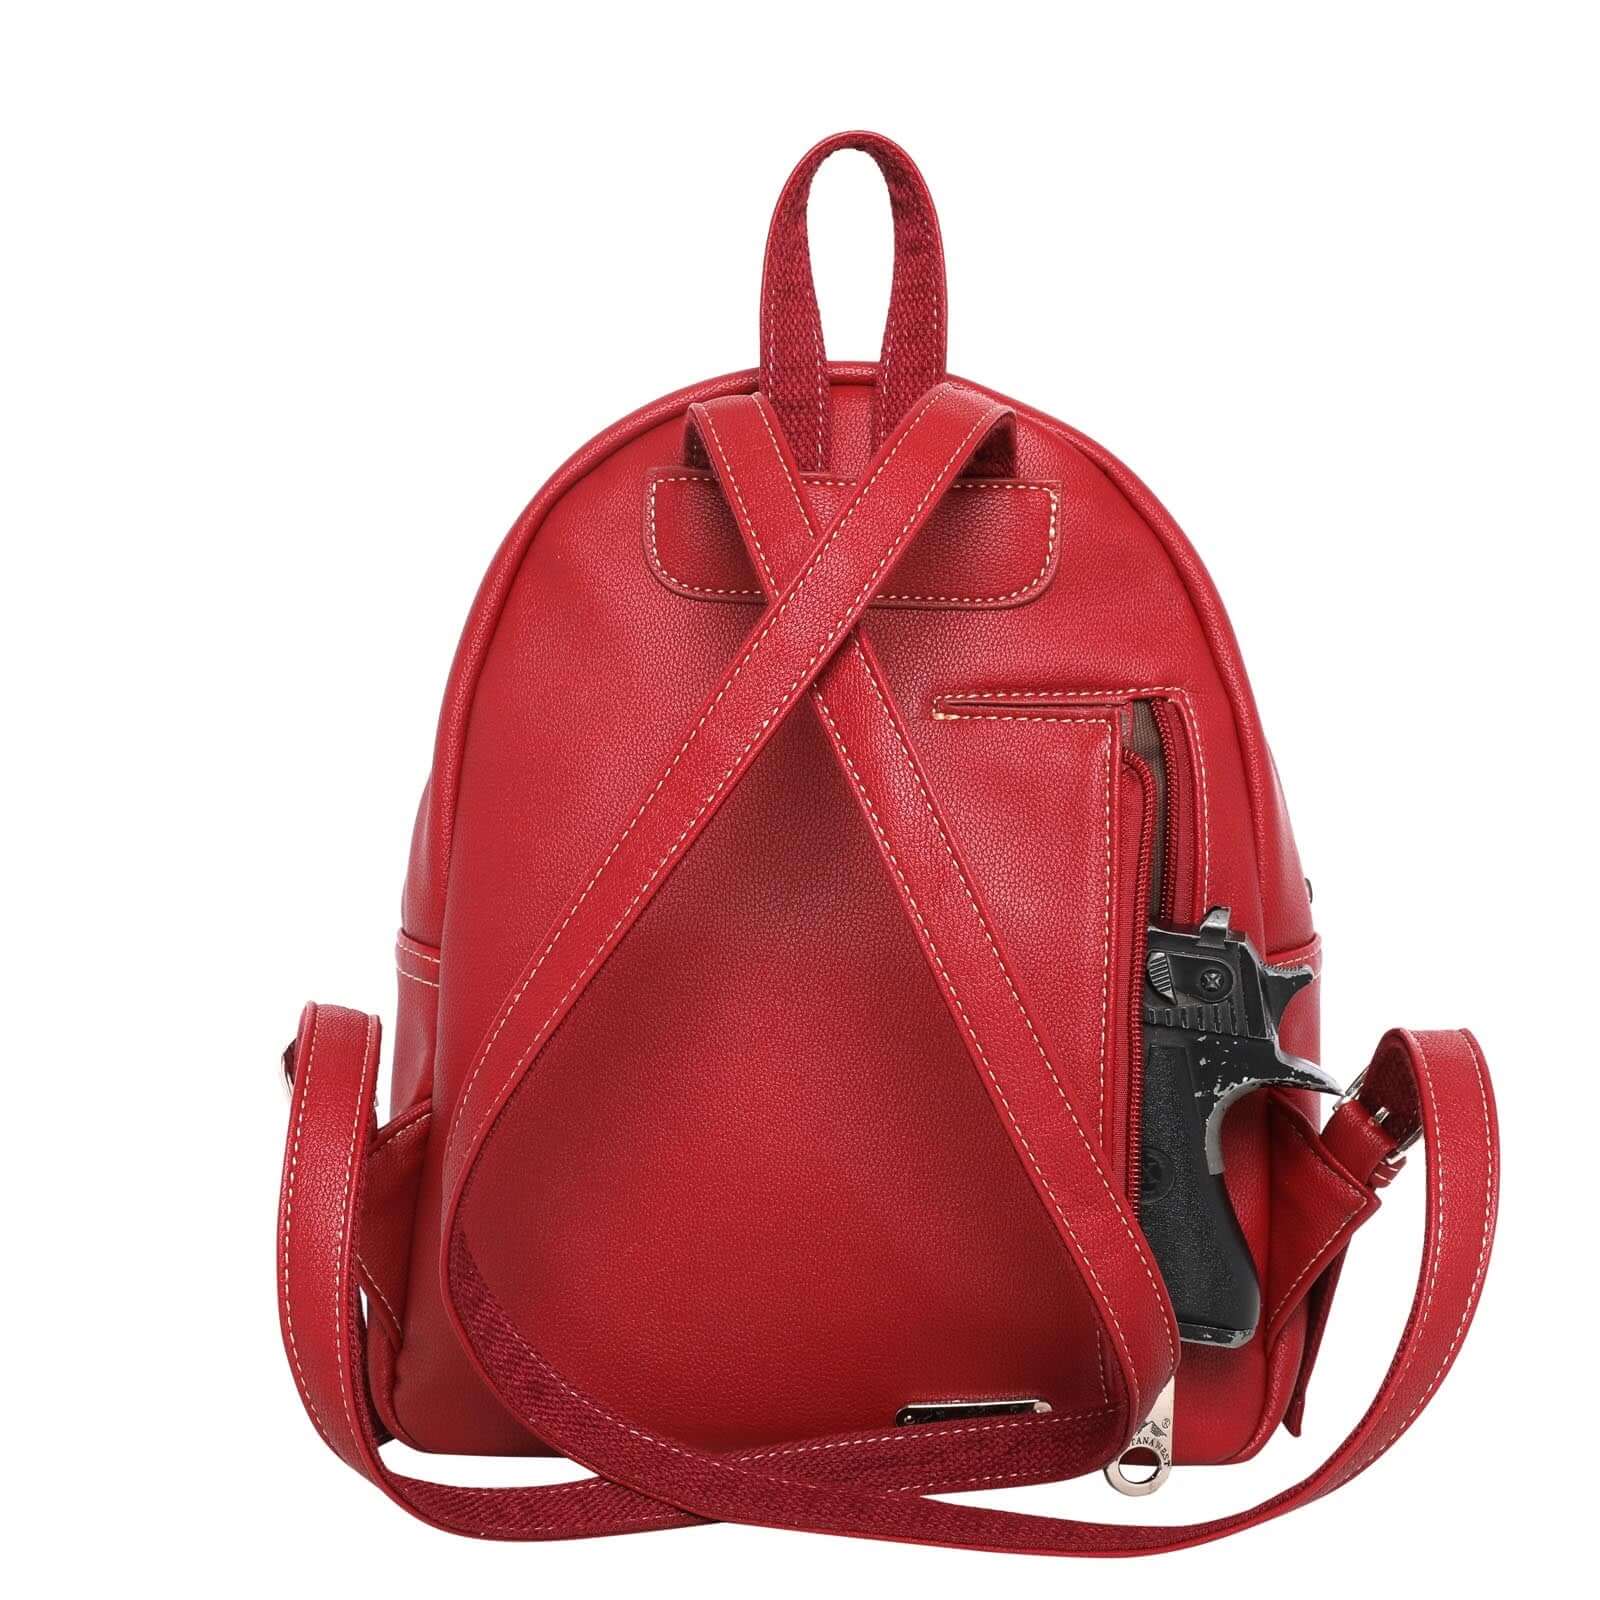 Montana West American Pride Concealed Carry Backpack US Flag Bag Red-US04G-9110-1600-RD-5